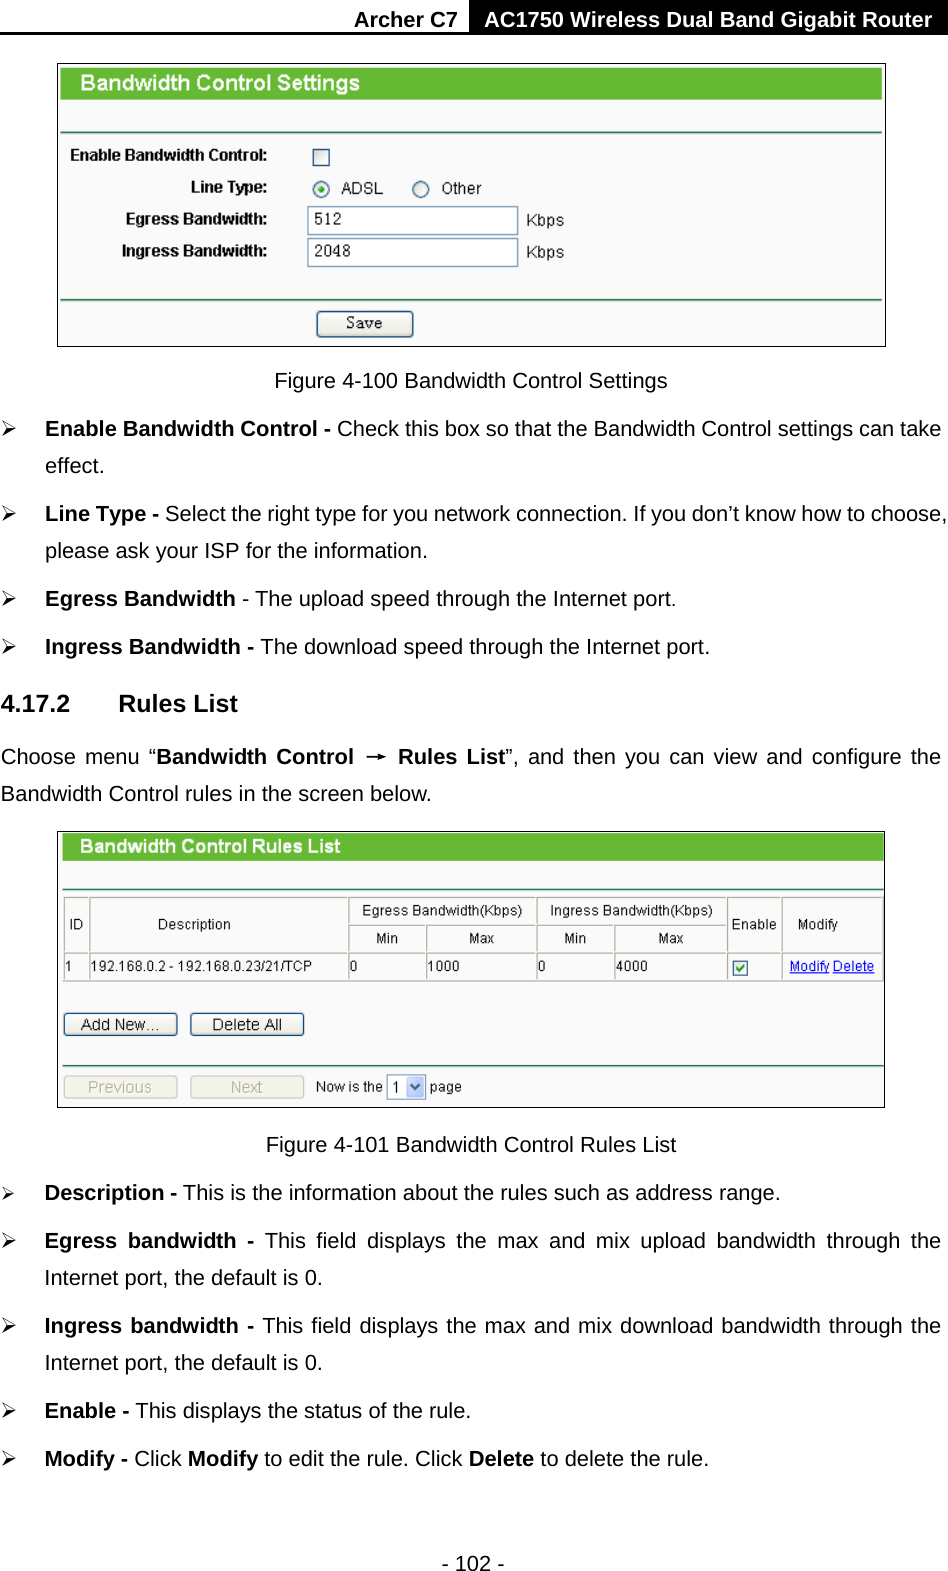 Archer C7 AC1750 Wireless Dual Band Gigabit Router  - 102 -  Figure 4-100 Bandwidth Control Settings  Enable Bandwidth Control - Check this box so that the Bandwidth Control settings can take effect.  Line Type - Select the right type for you network connection. If you don’t know how to choose, please ask your ISP for the information.  Egress Bandwidth - The upload speed through the Internet port.  Ingress Bandwidth - The download speed through the Internet port. 4.17.2 Rules List Choose menu “Bandwidth Control → Rules List”, and then you can view and configure the Bandwidth Control rules in the screen below.  Figure 4-101 Bandwidth Control Rules List  Description - This is the information about the rules such as address range.  Egress bandwidth  - This field displays the  max and mix upload  bandwidth through the Internet port, the default is 0.  Ingress bandwidth - This field displays the max and mix download bandwidth through the Internet port, the default is 0.  Enable - This displays the status of the rule.  Modify - Click Modify to edit the rule. Click Delete to delete the rule. 